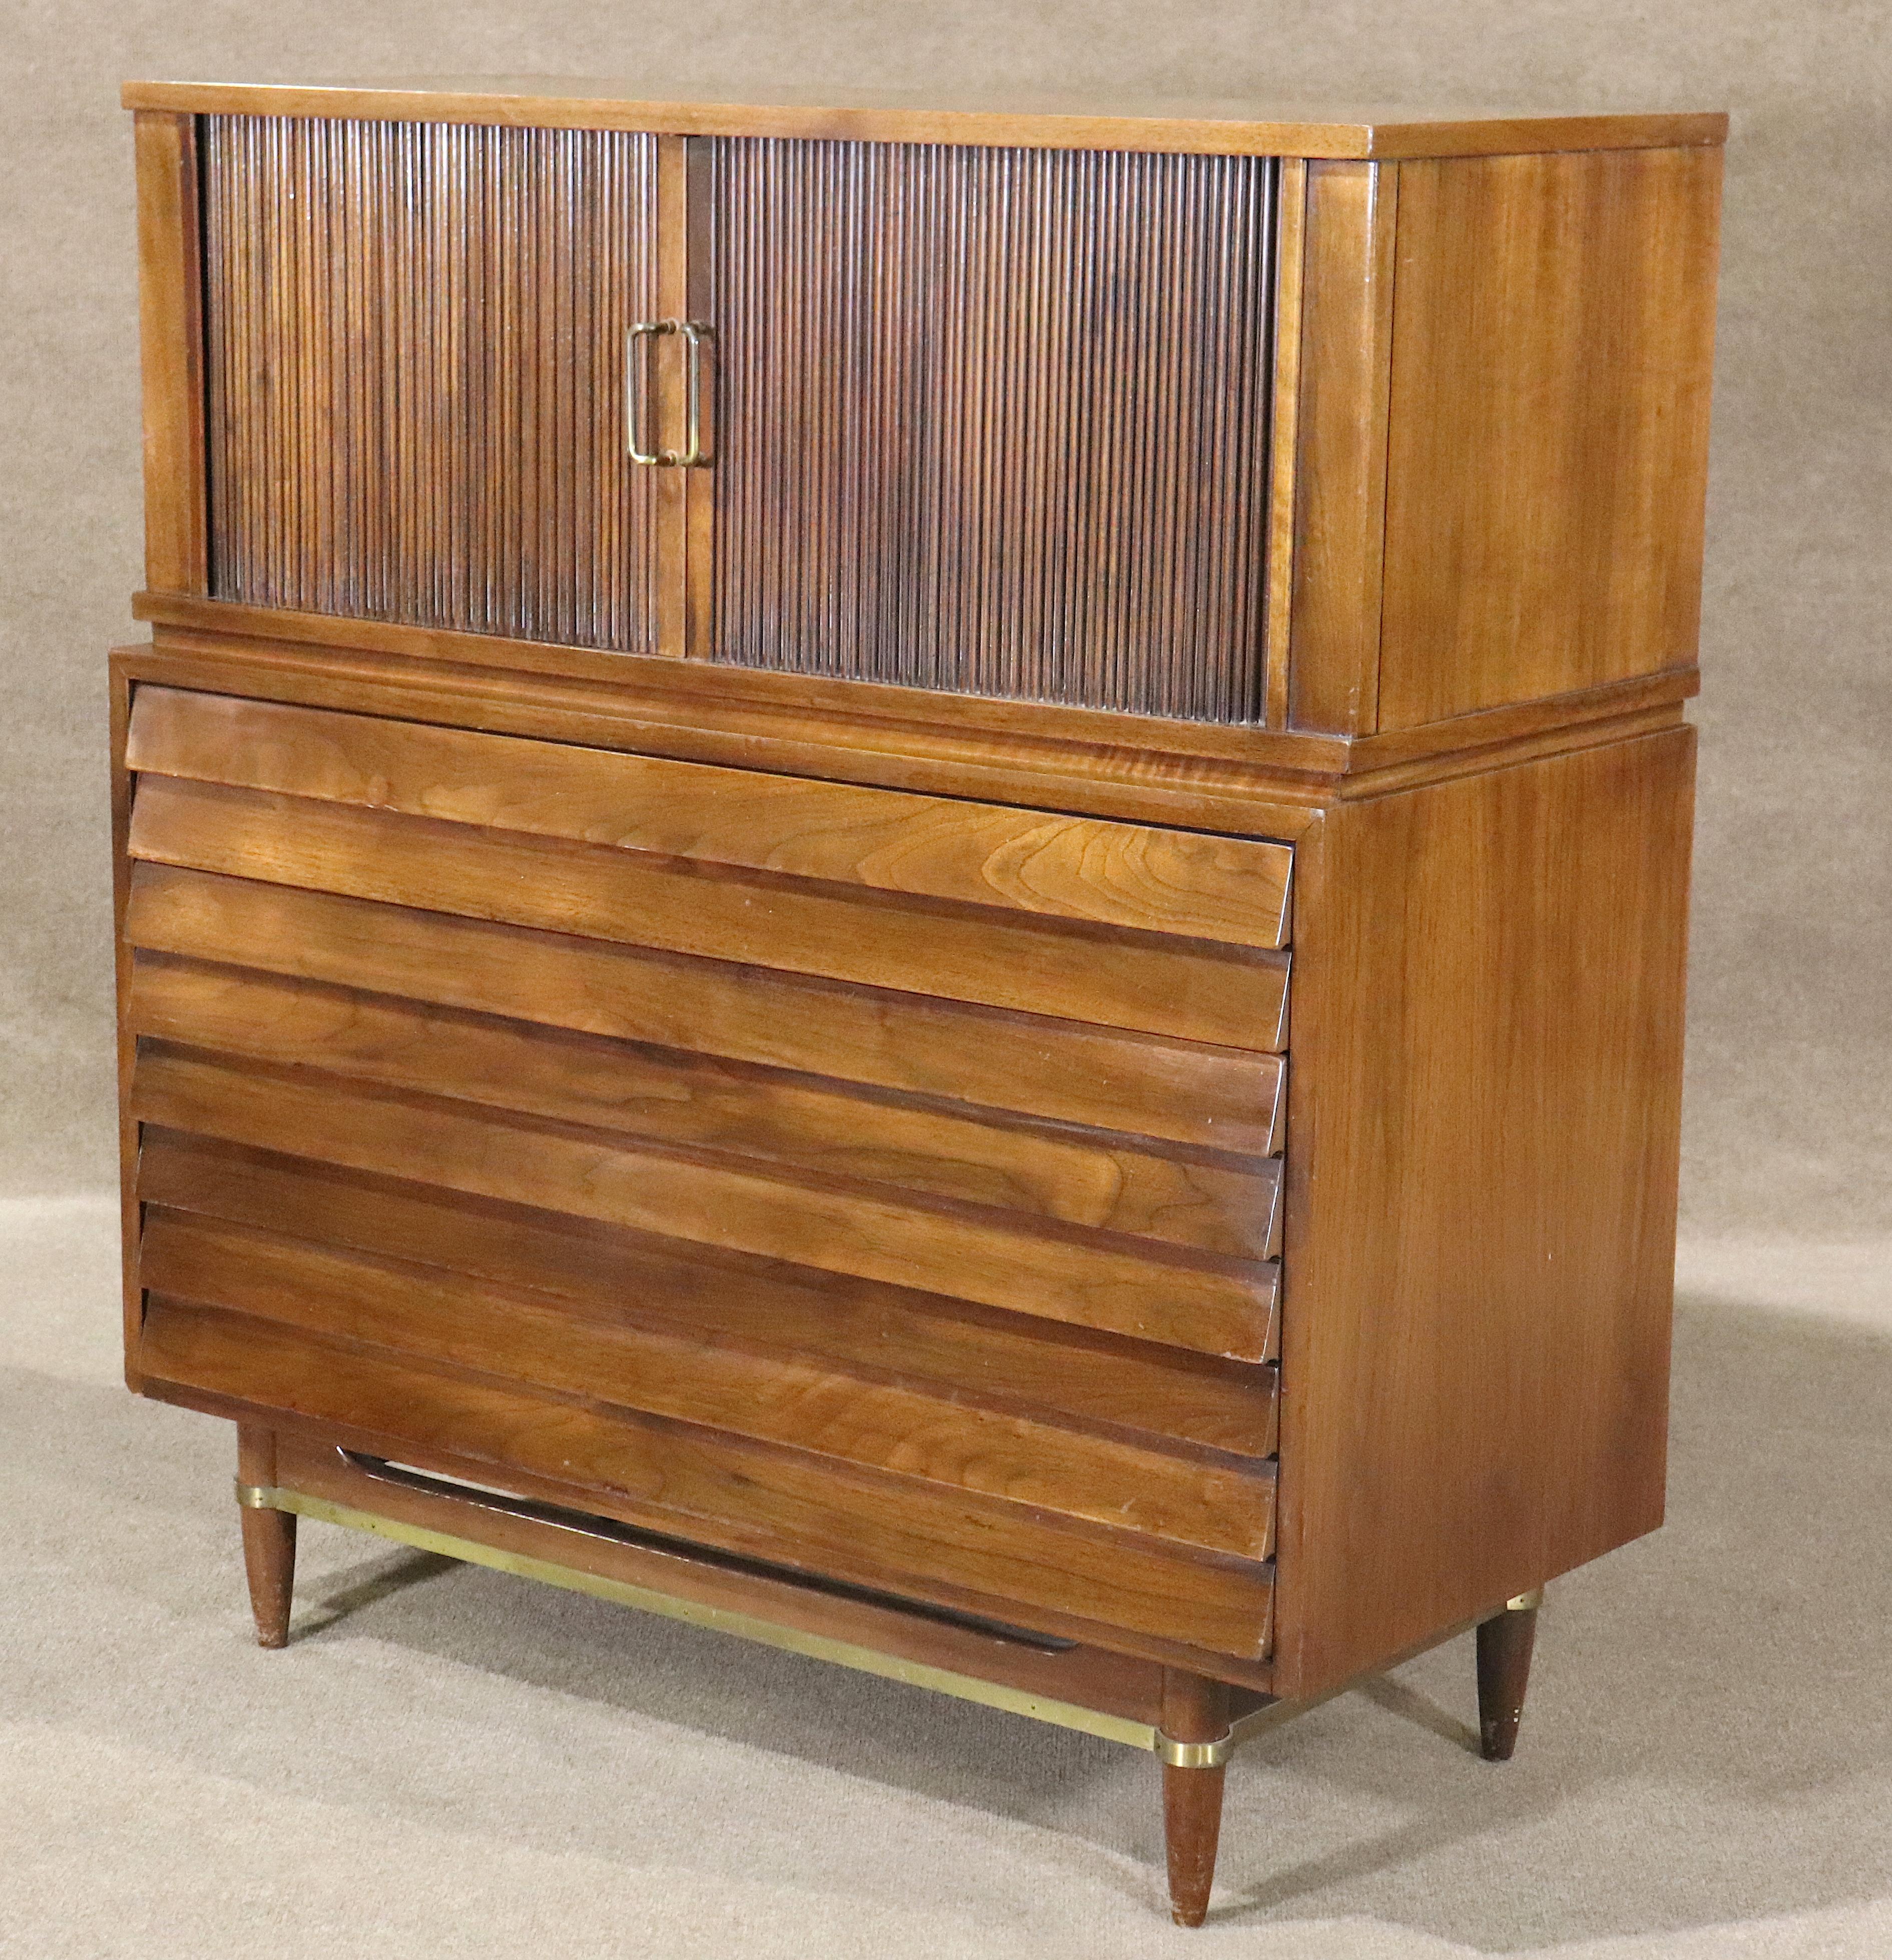 Iconic highchest from the Dania series by Merton Gershun, for American of Martinsville. Features include rich walnut grain, louvered drawers, signature brass accents, and articulated tambour doors, making this best-selling line an American standard